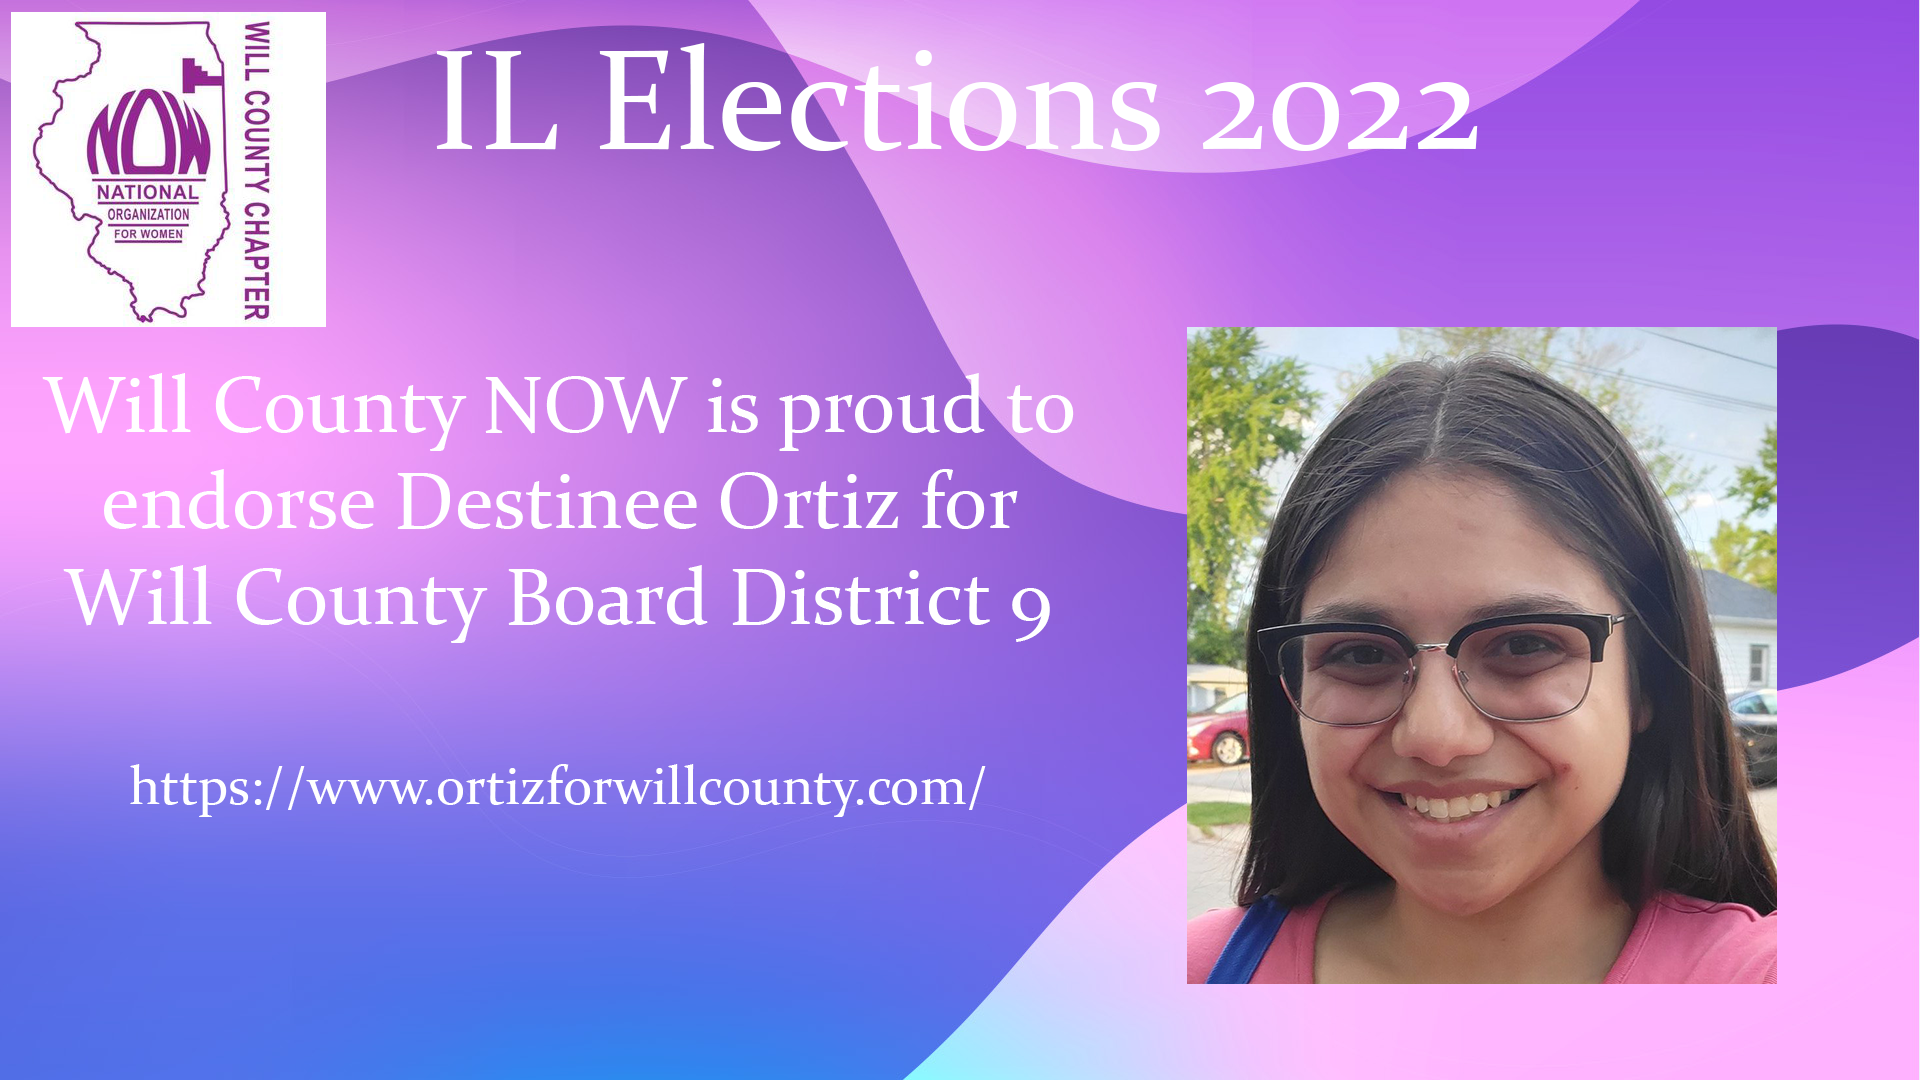 Will County NOW Endorses Destinee Ortiz for Will County Board District 9